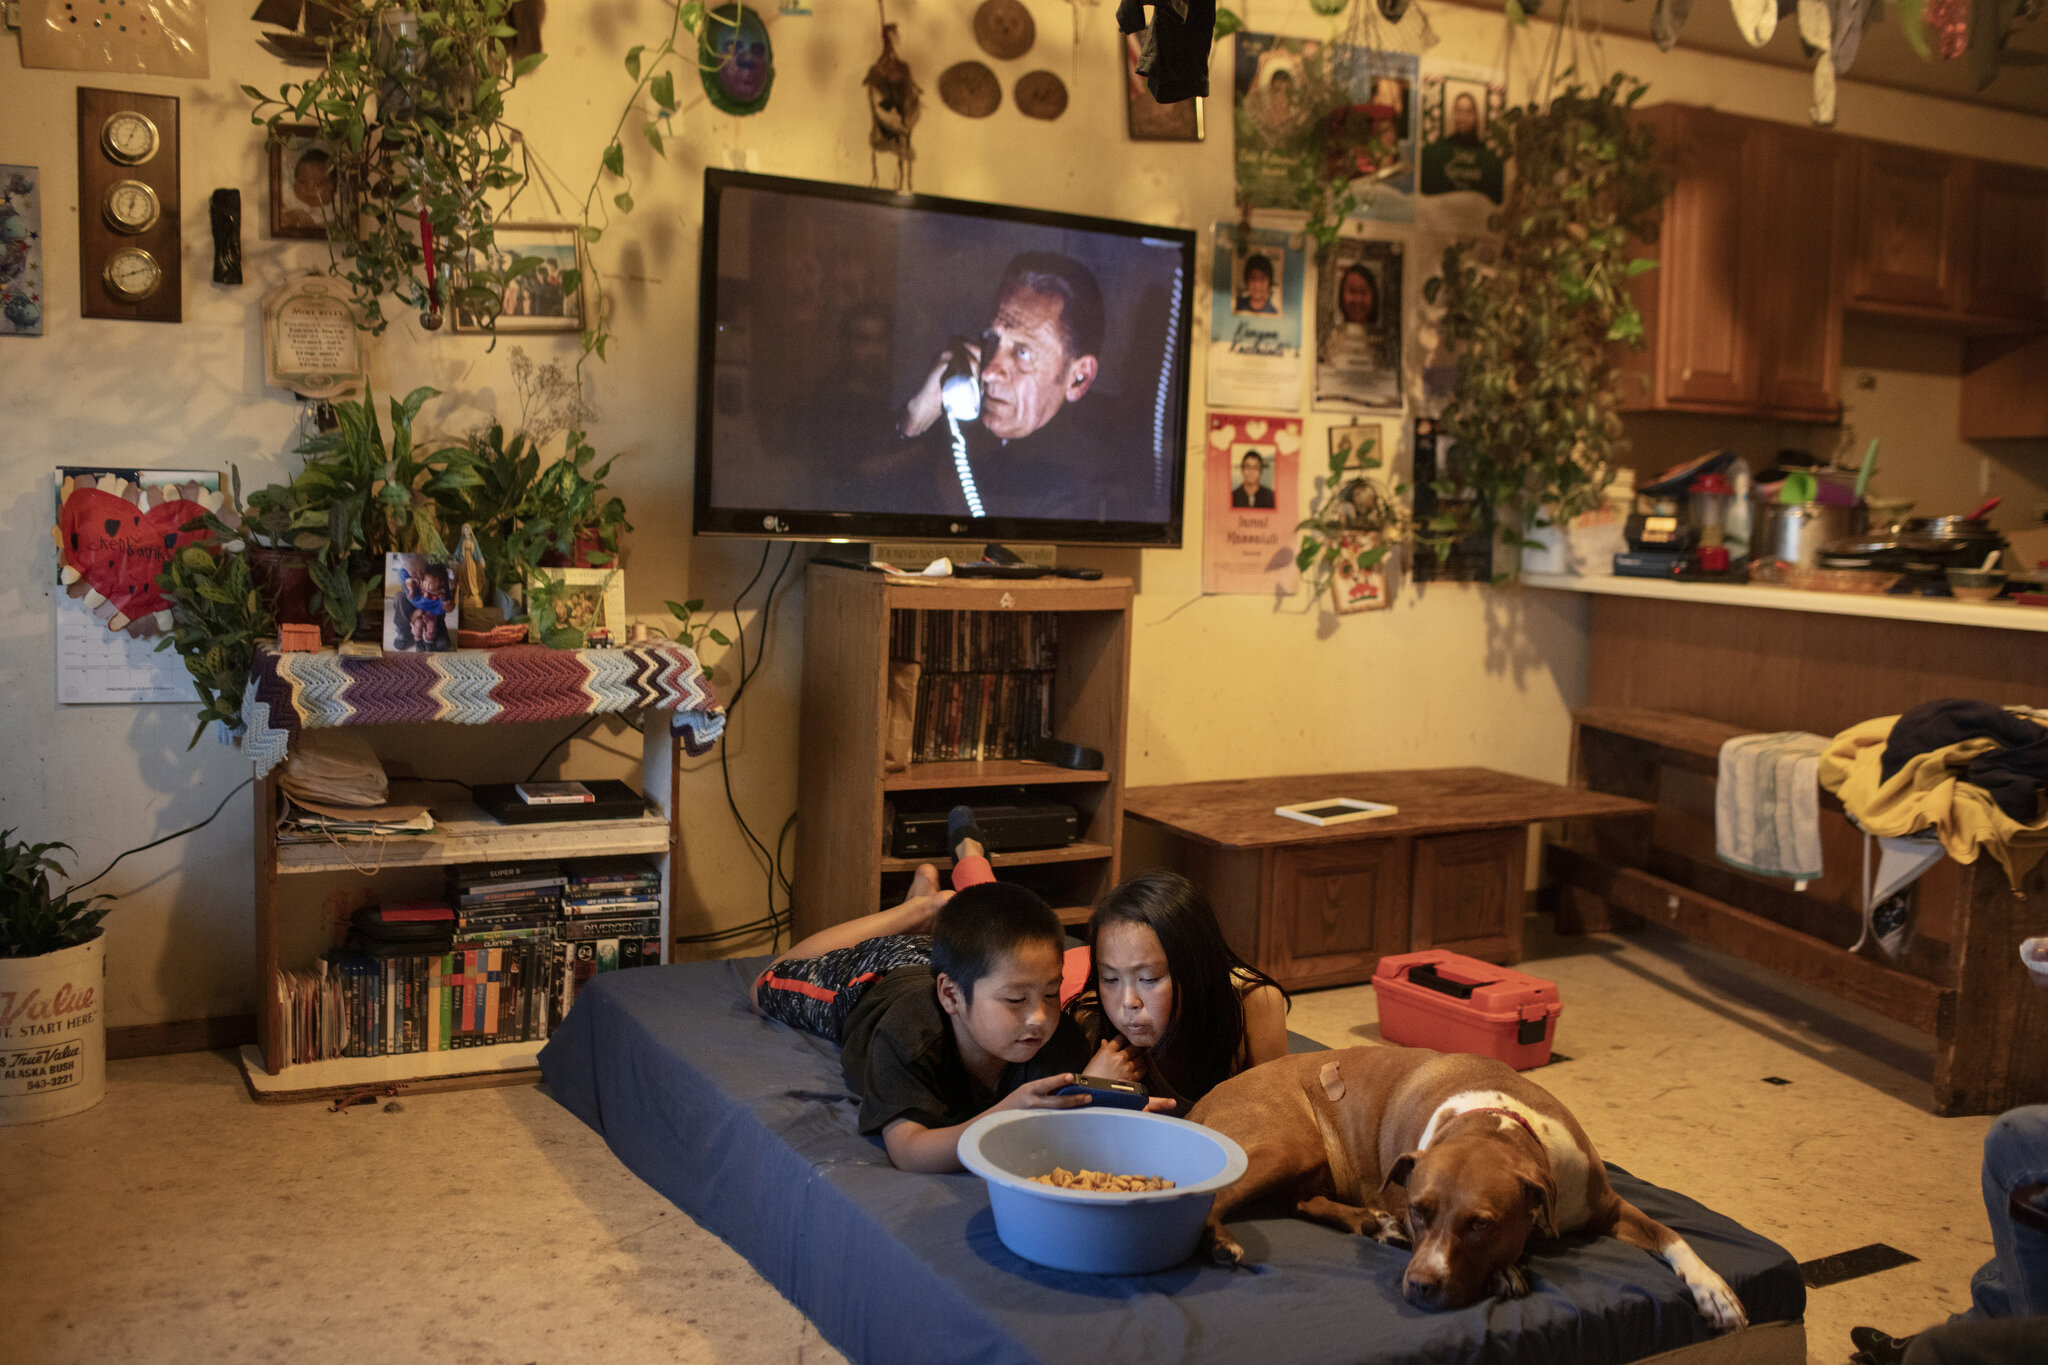  Jasmine and Kenyon Kassaiuli in their living room in Newtok, Alaska. Their ceiling recently split in two as a result of thawing permafrost underneath the ground destroying the house's foundation.  